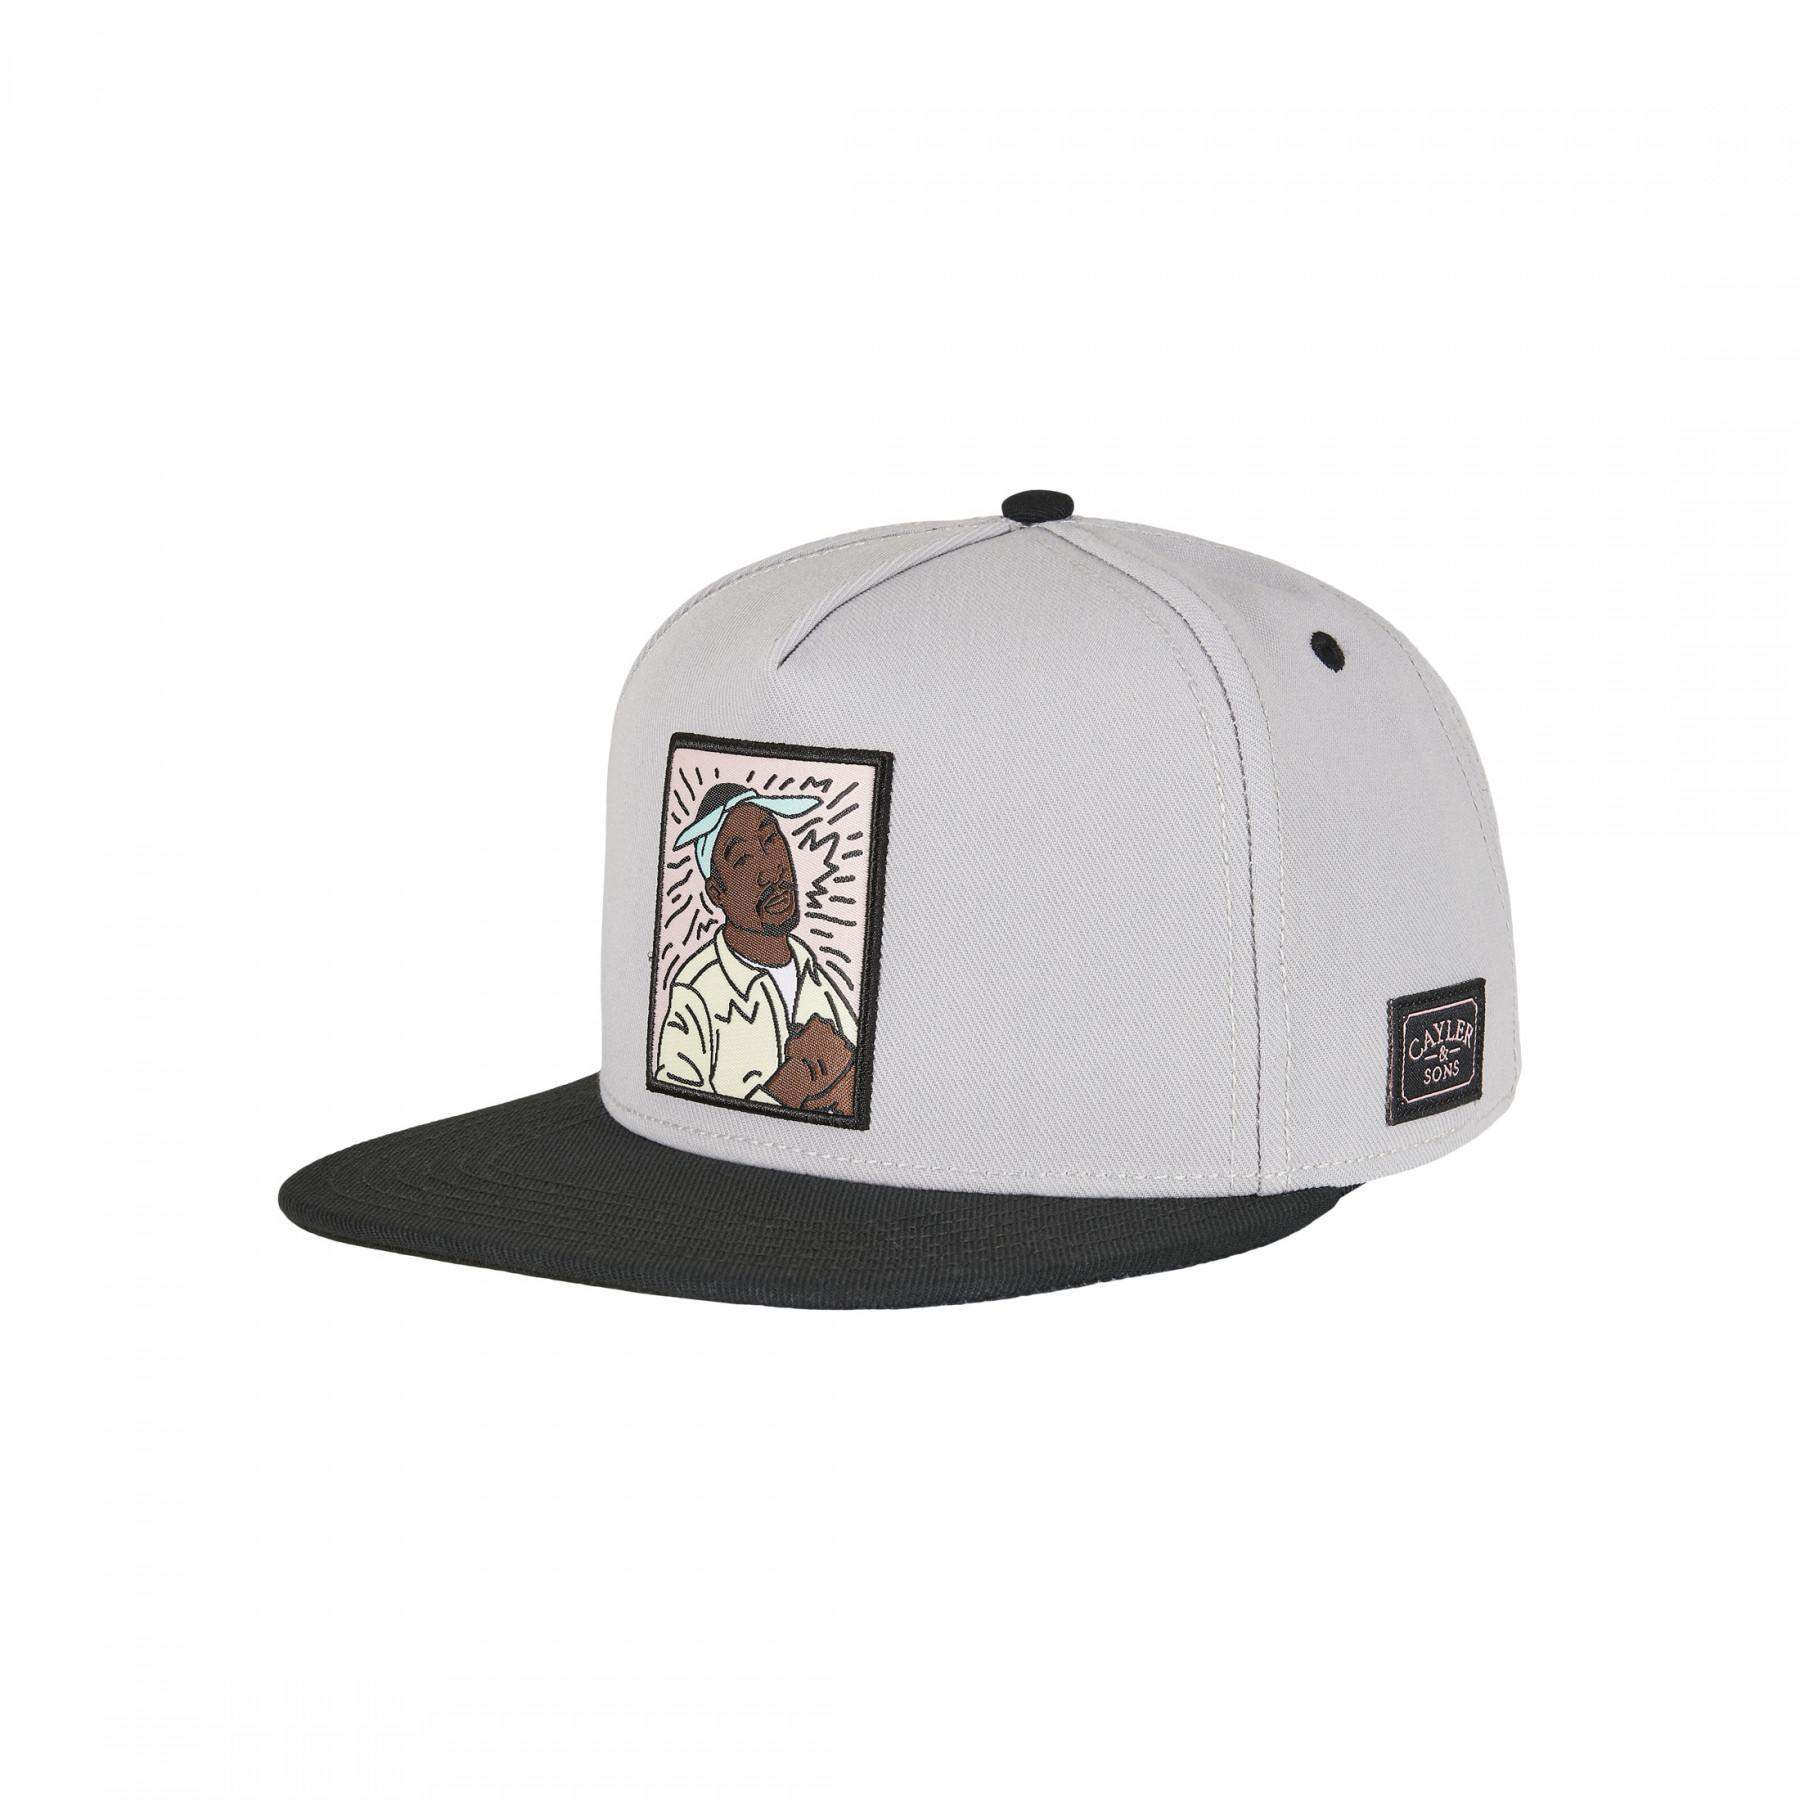 Casquette Cayler & Sons wl 2pac lines